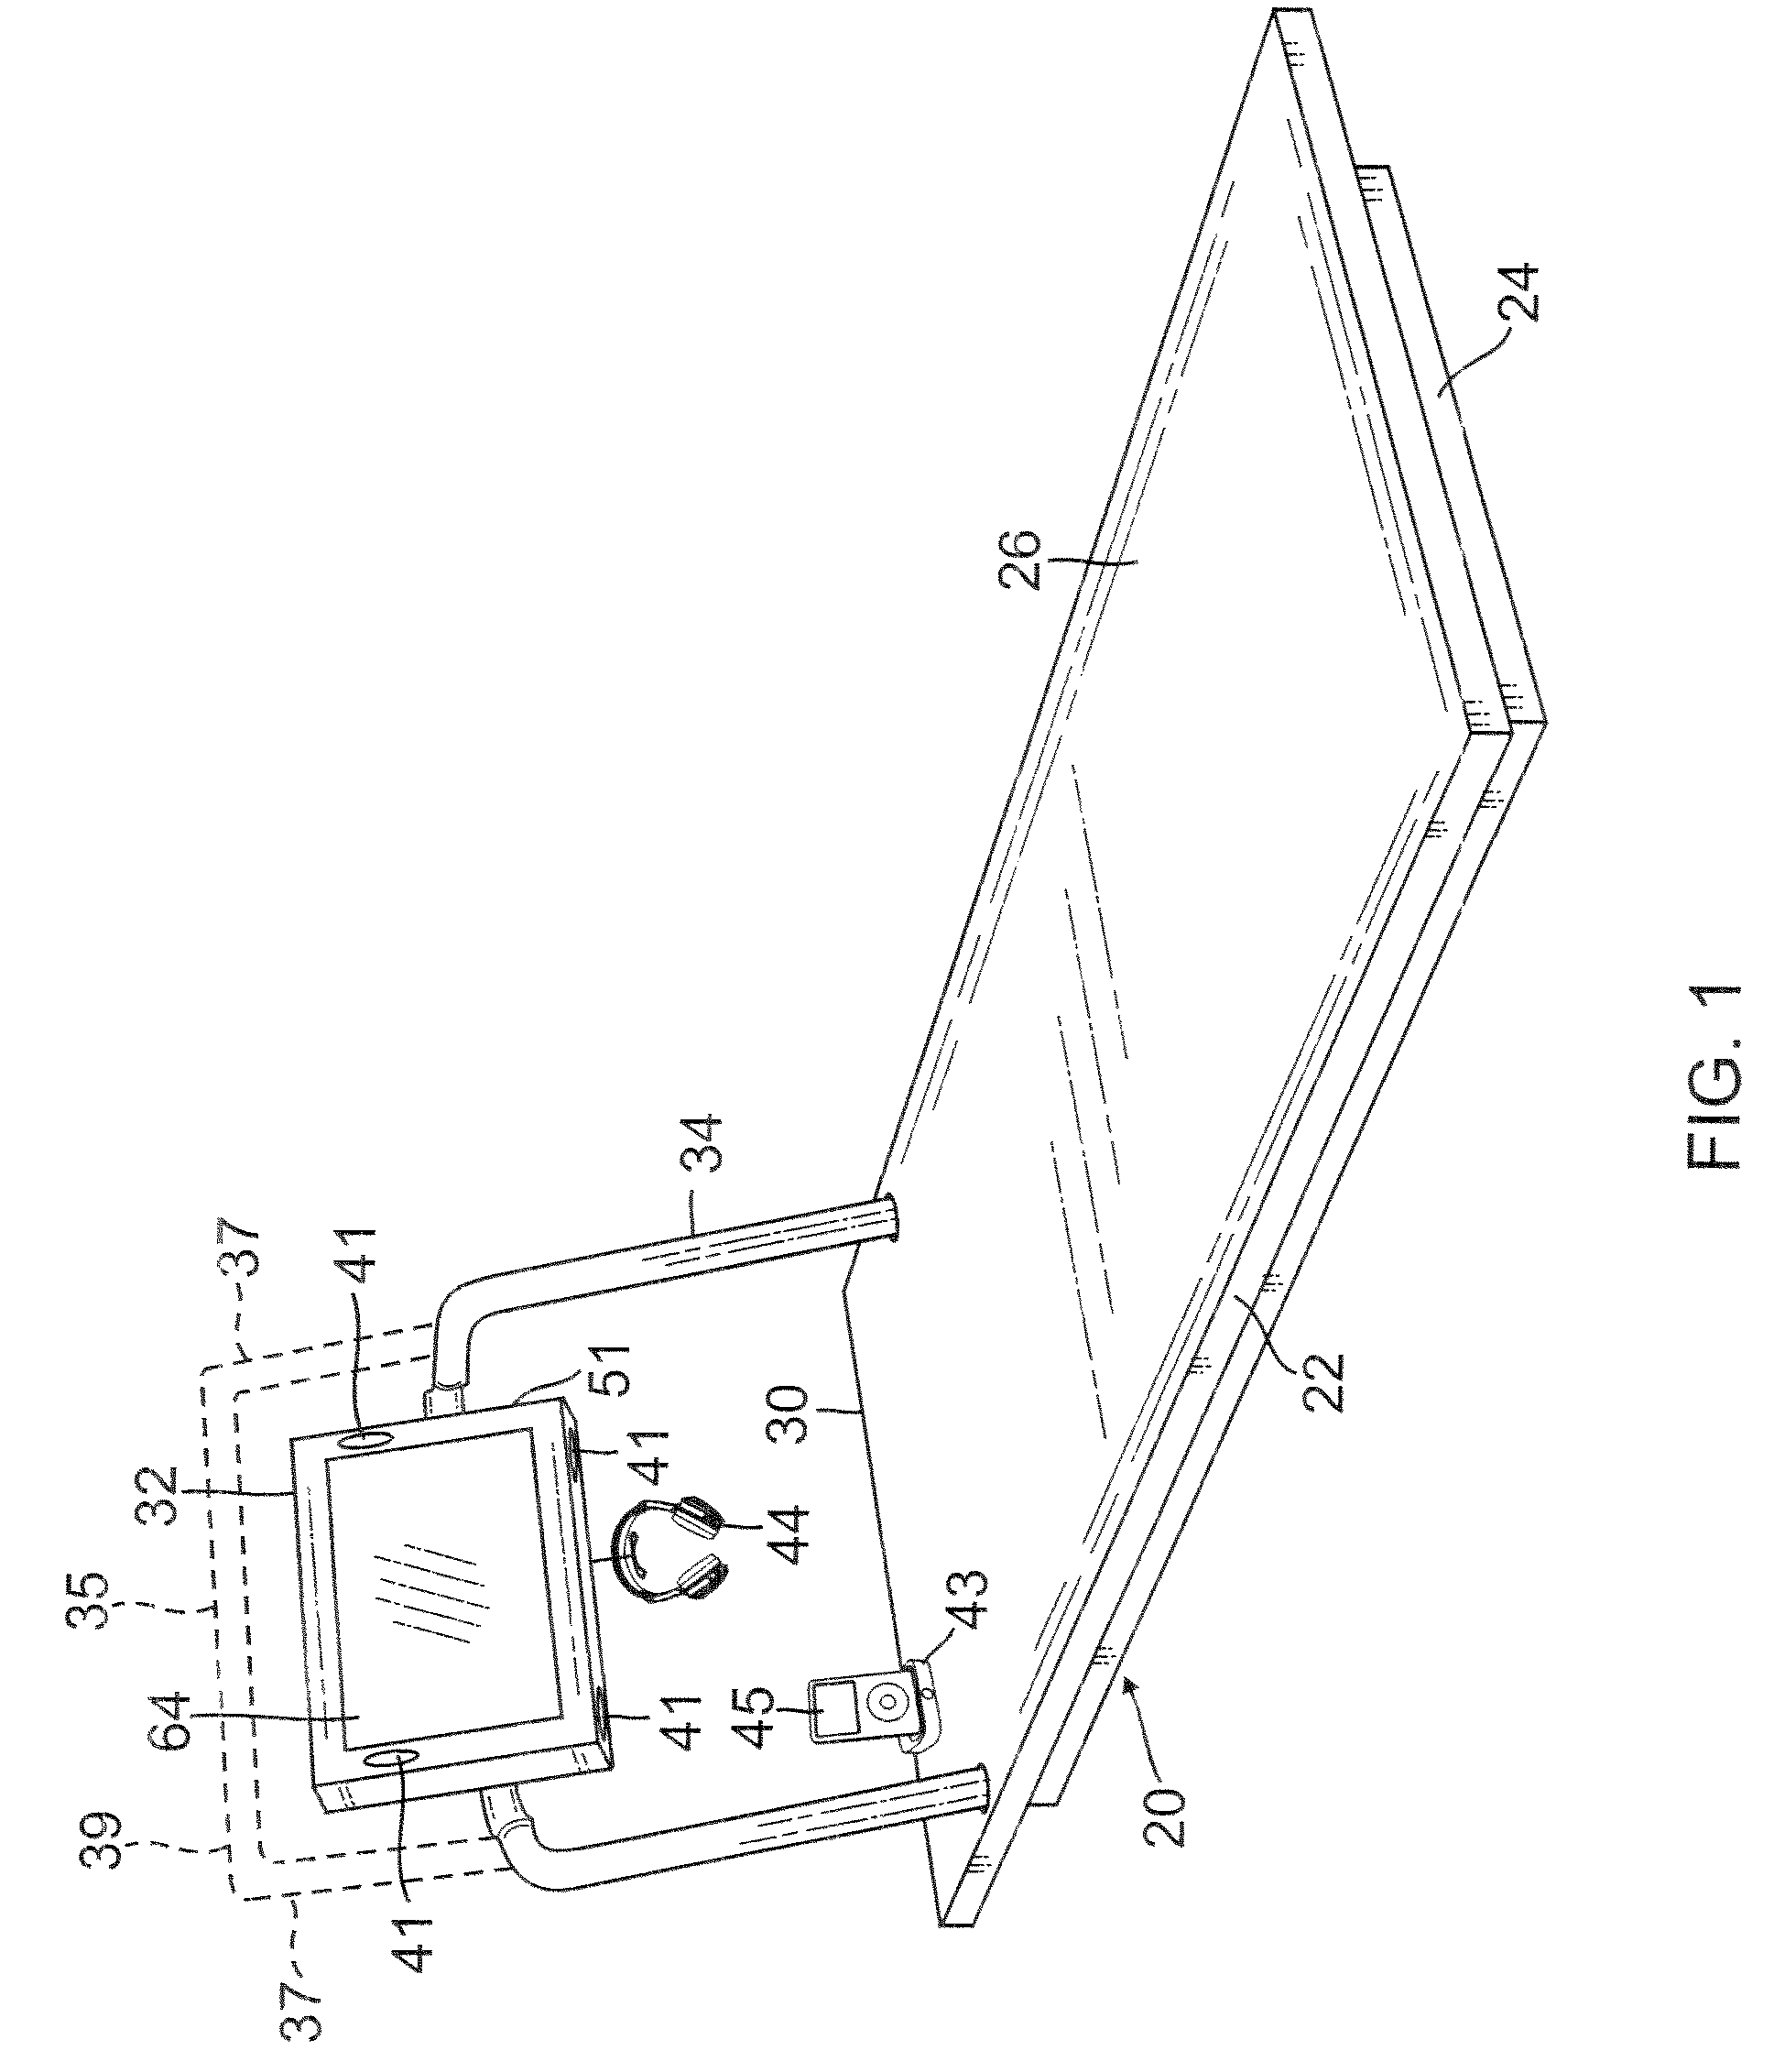 Exercise apparatus and methods